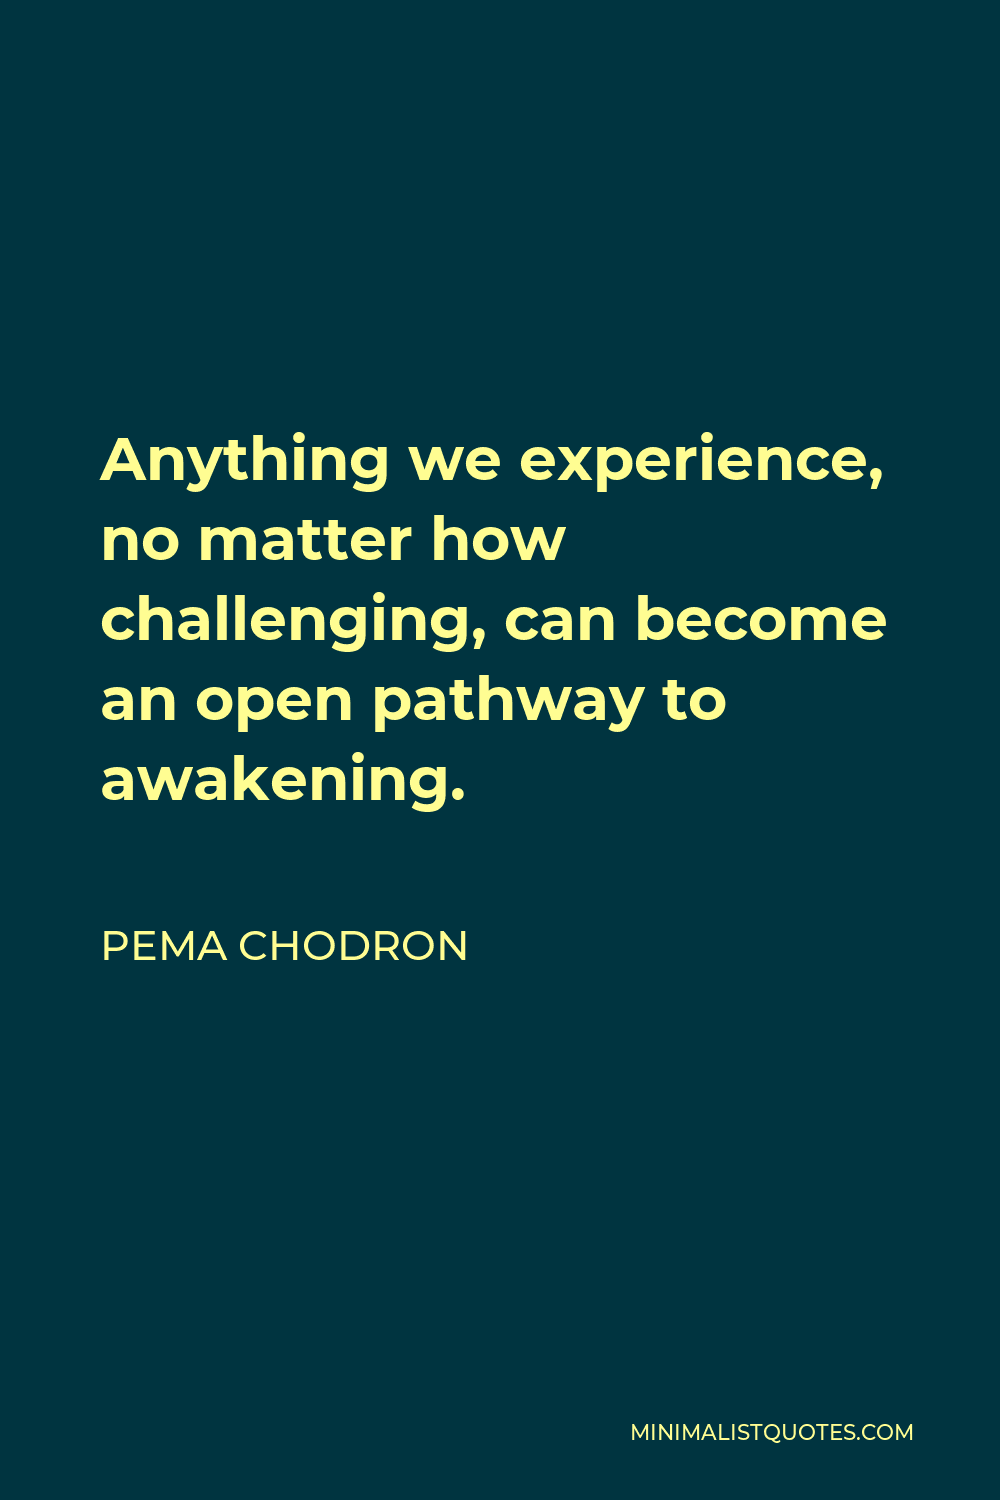 Pema Chodron Quote - Anything we experience, no matter how challenging, can become an open pathway to awakening.